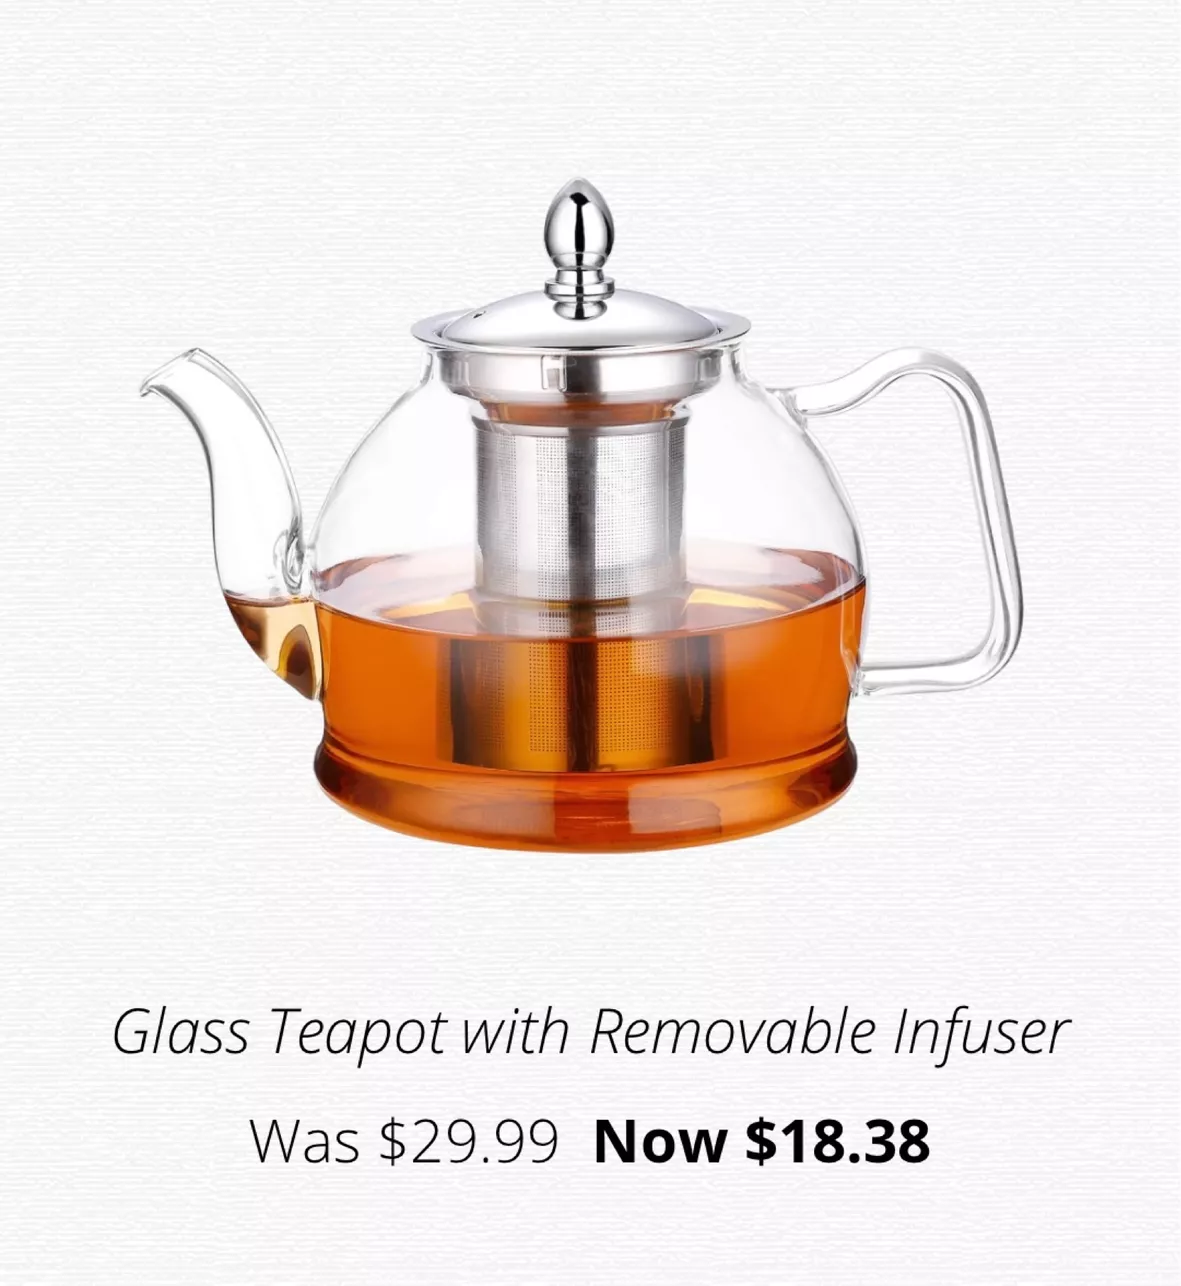 Hiware 1000ml Glass Teapot with Removable Infuser, Stovetop Safe Tea K